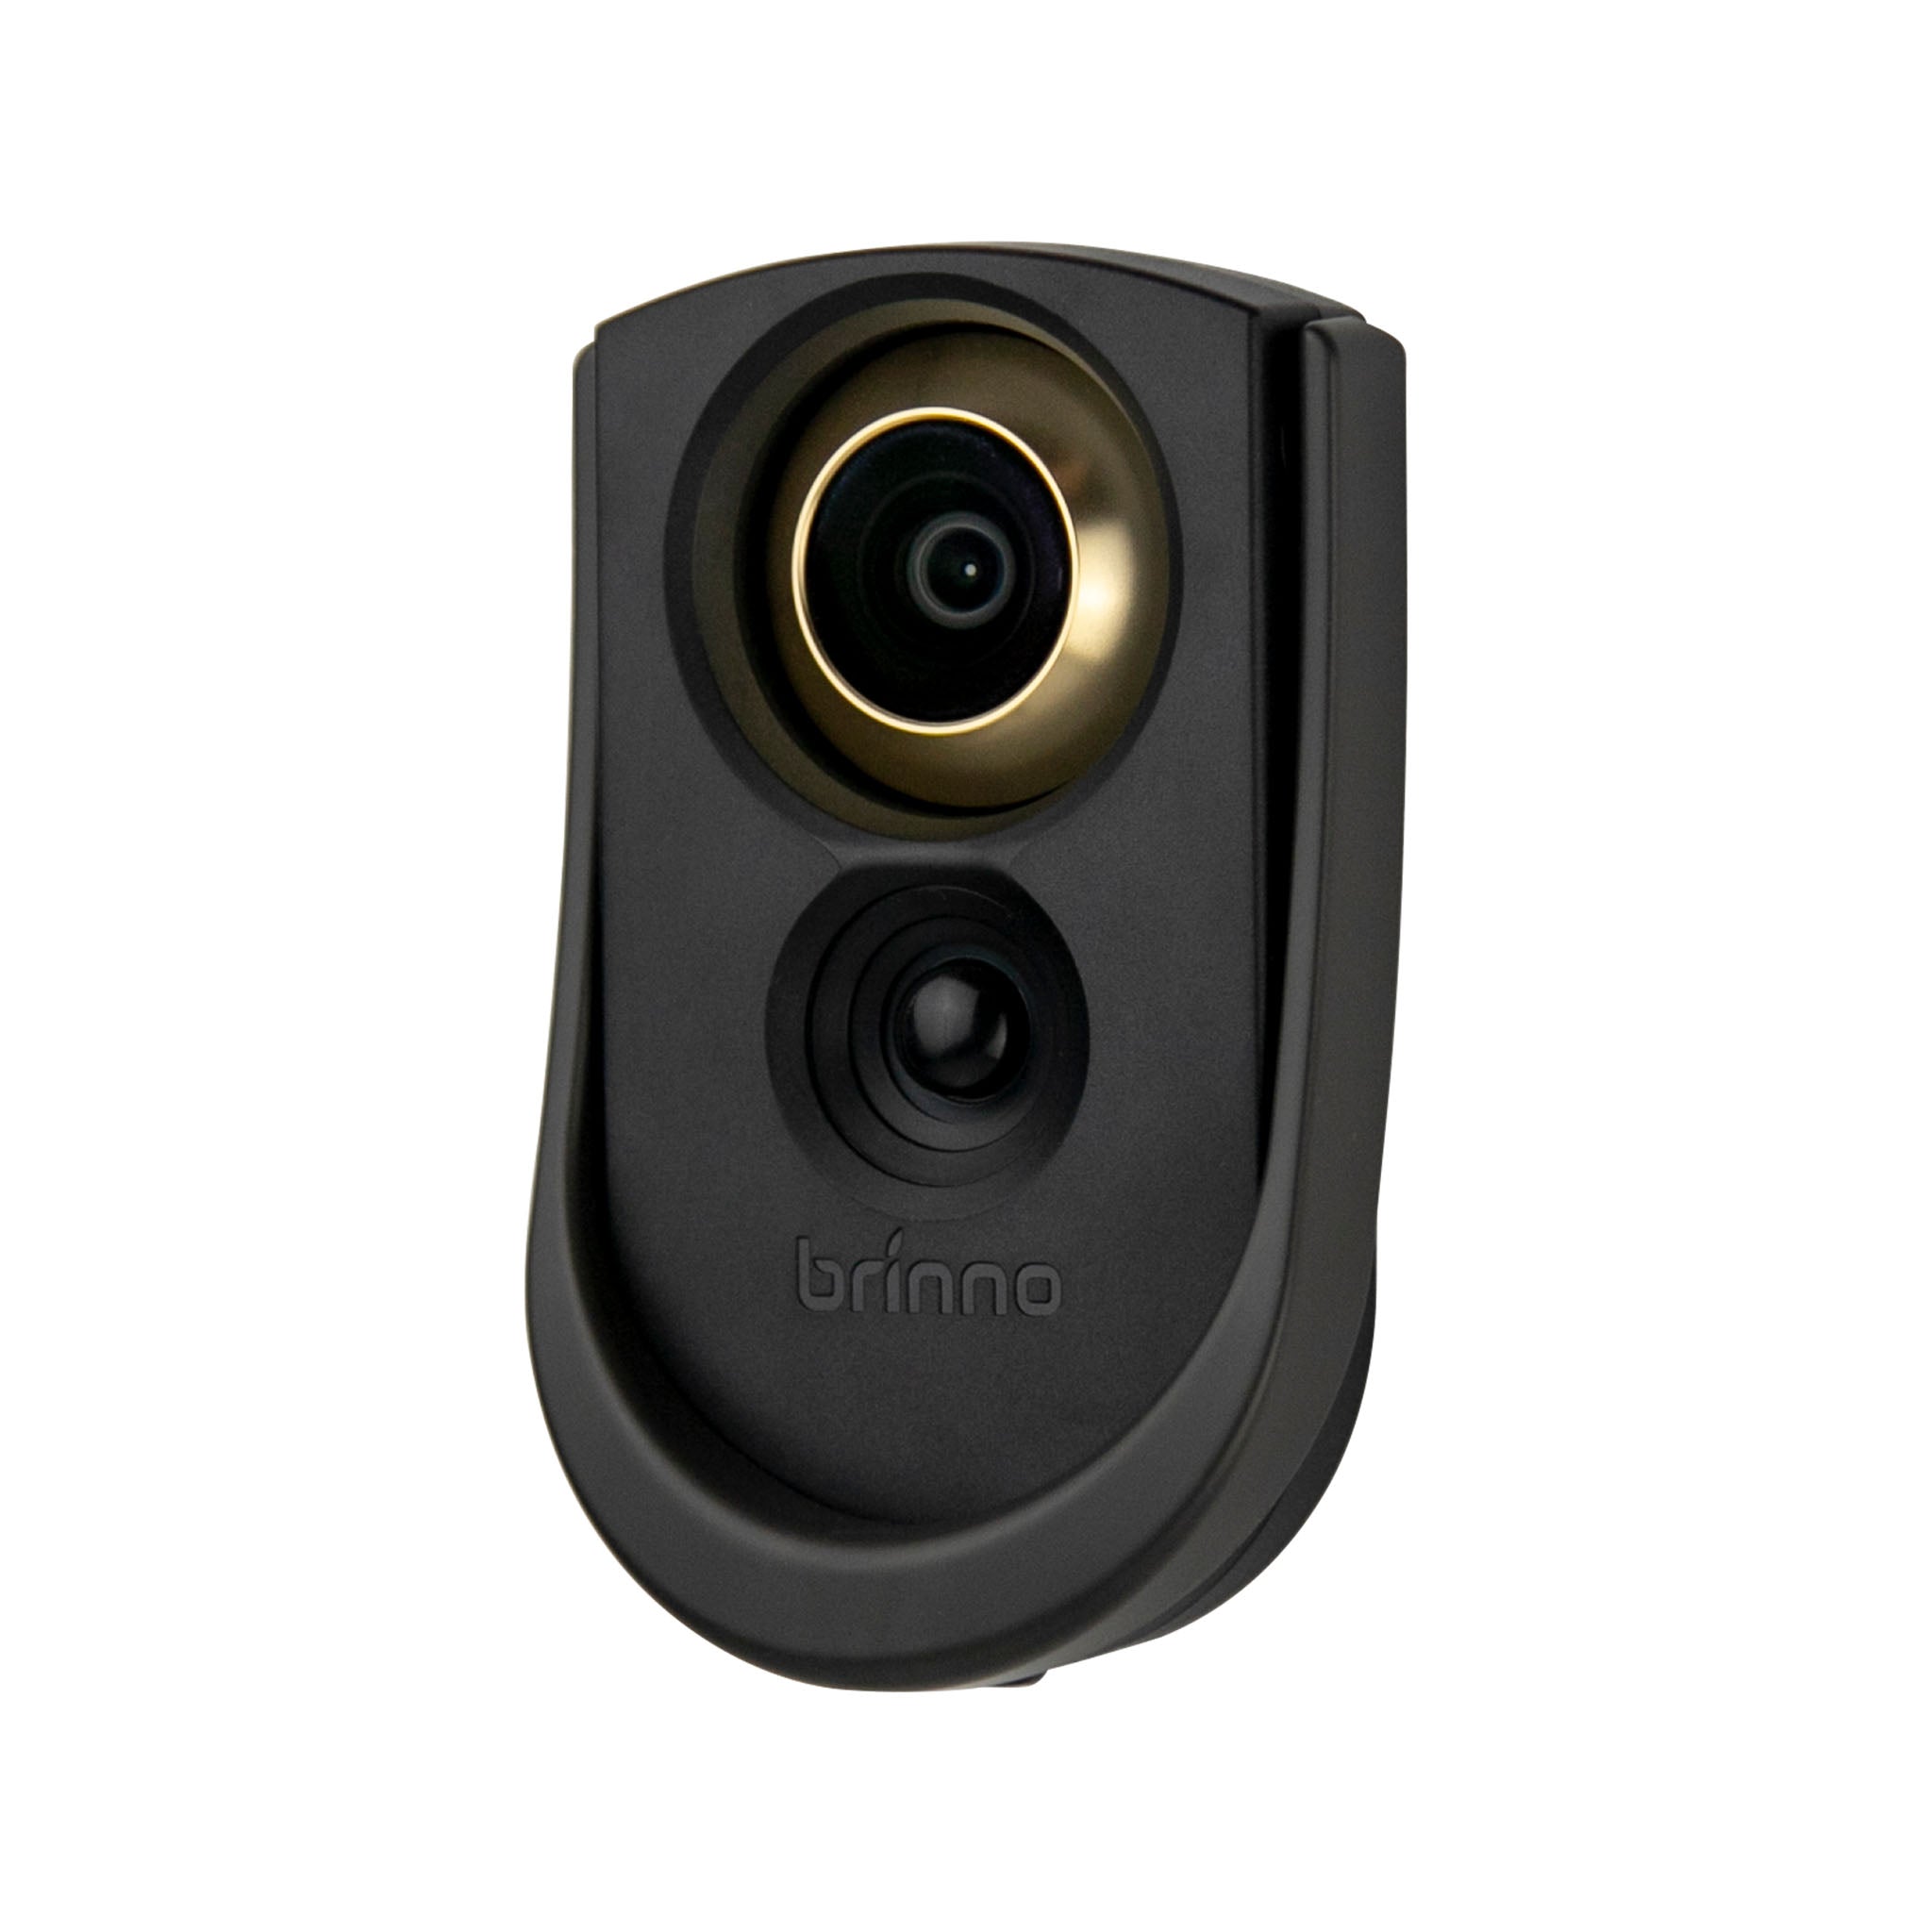 Brinno Duo SHC1000W Front Door Peephole Camera with Mobile and Live Feed - Brinno USA